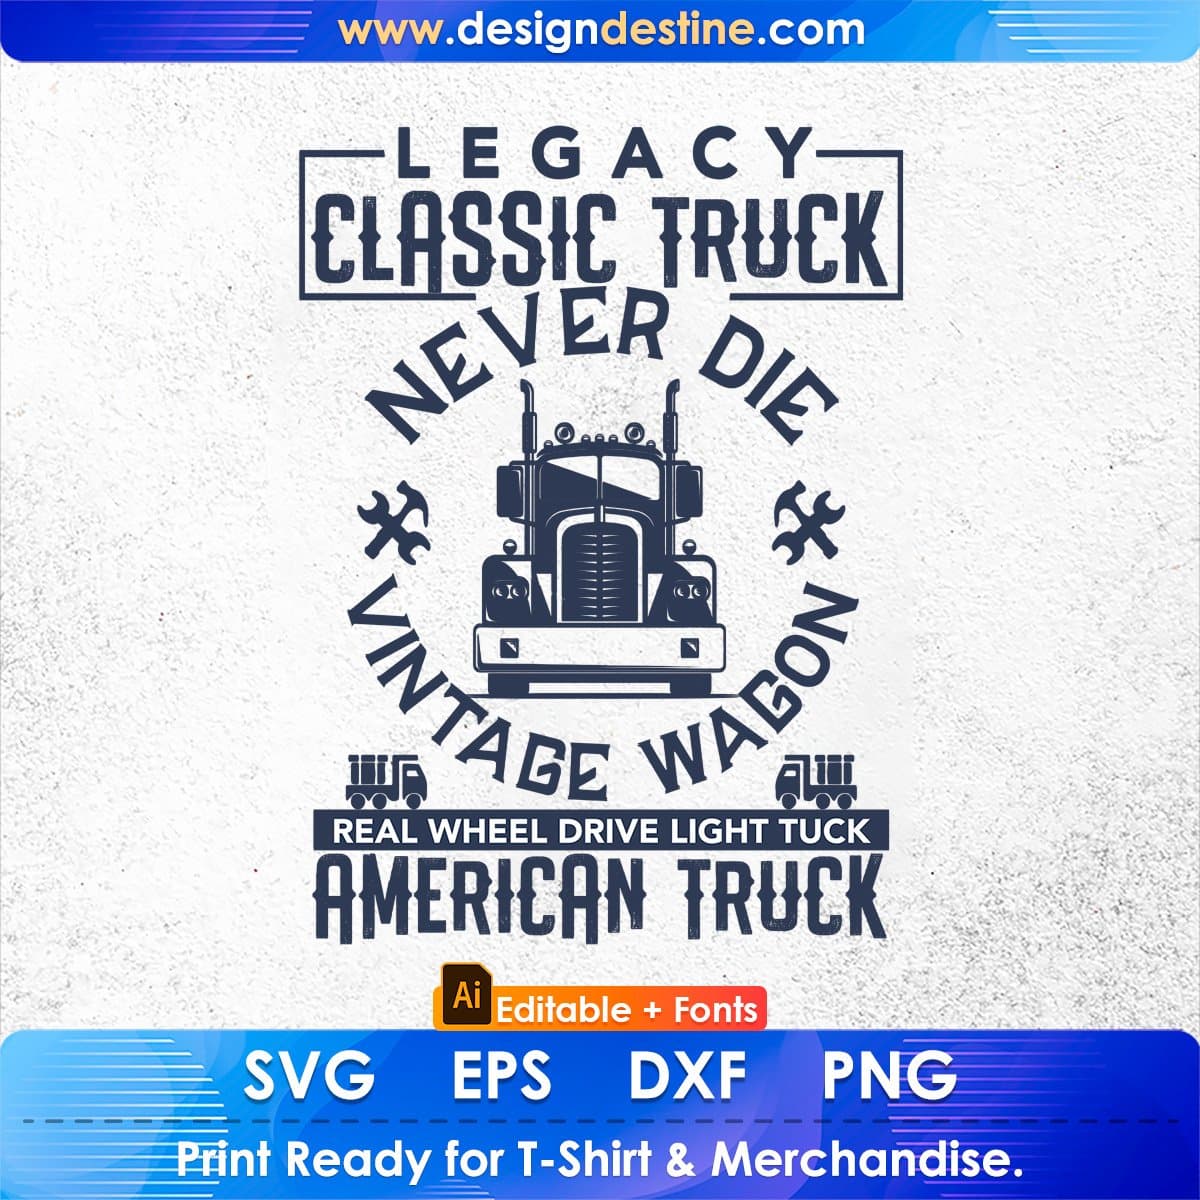 Legacy Classic Truck Never Die Vintage Wagon American Trucker Editable T shirt Design In Ai Svg Files